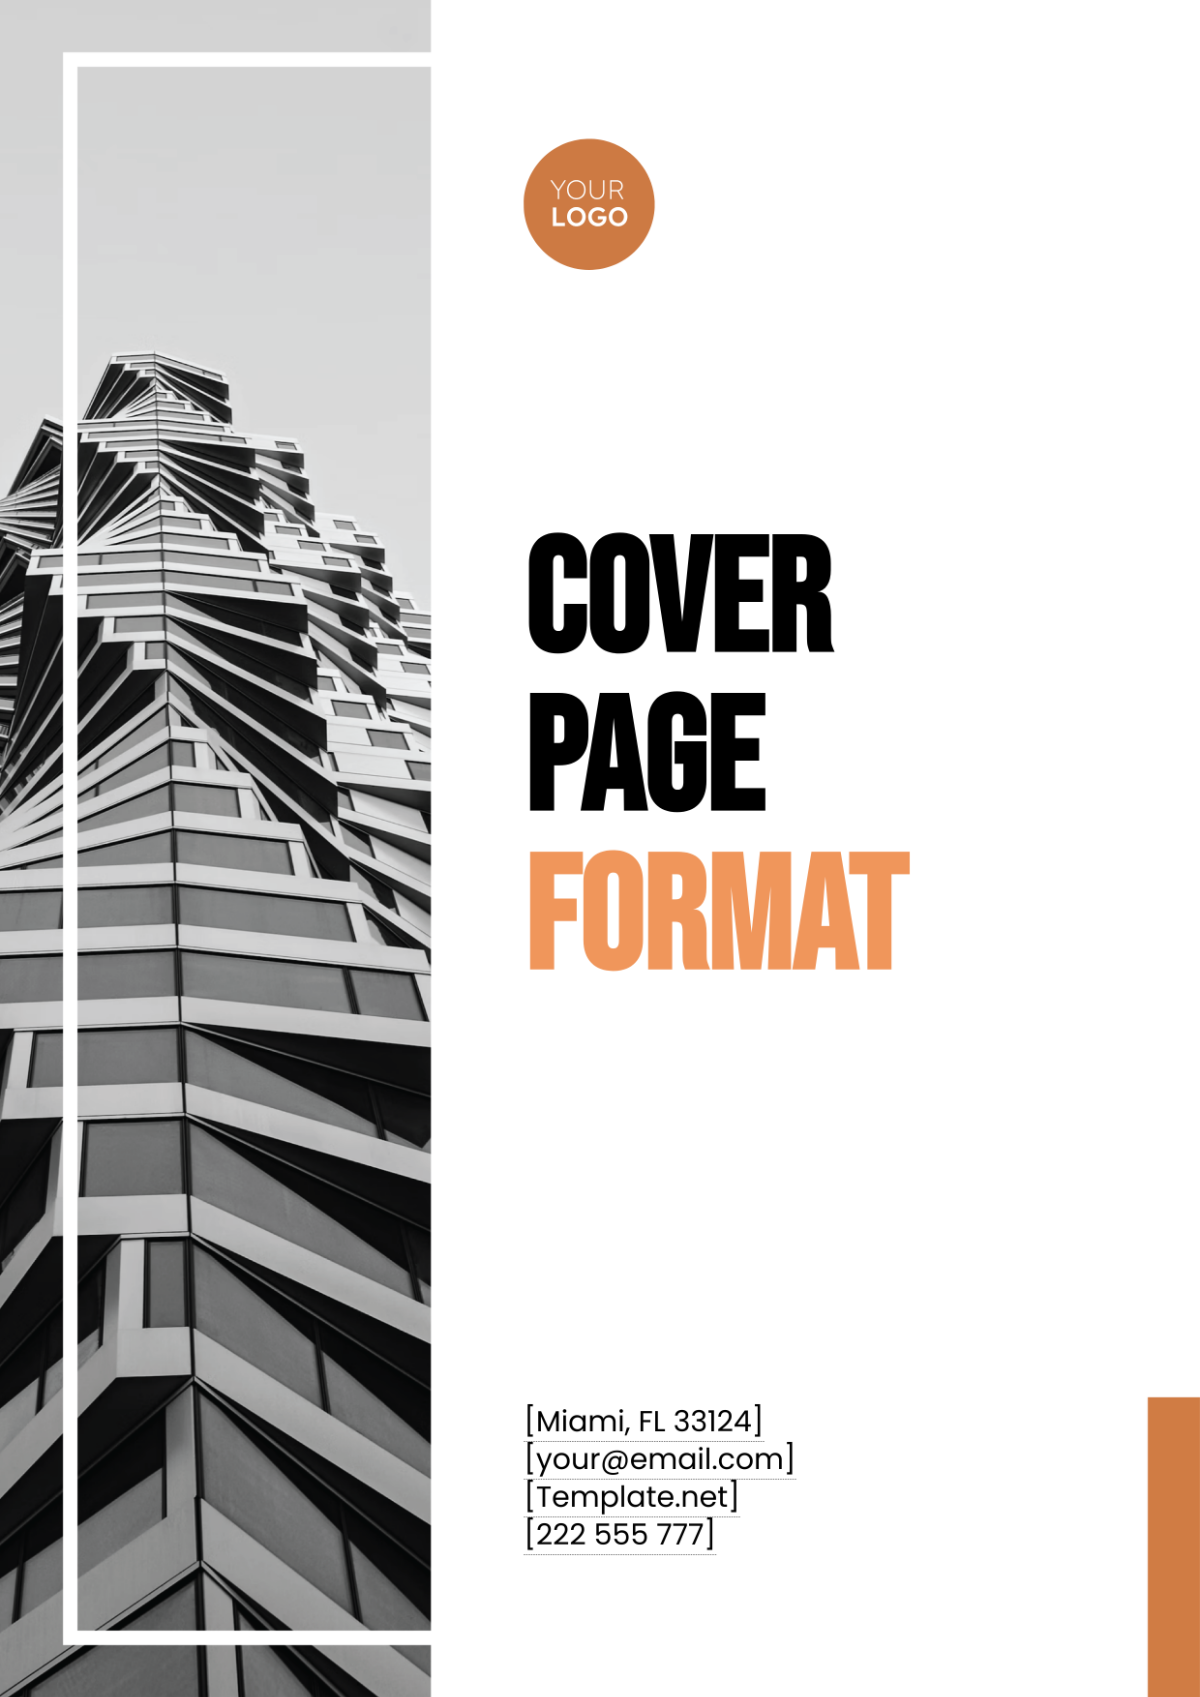 Cover Page Format Template